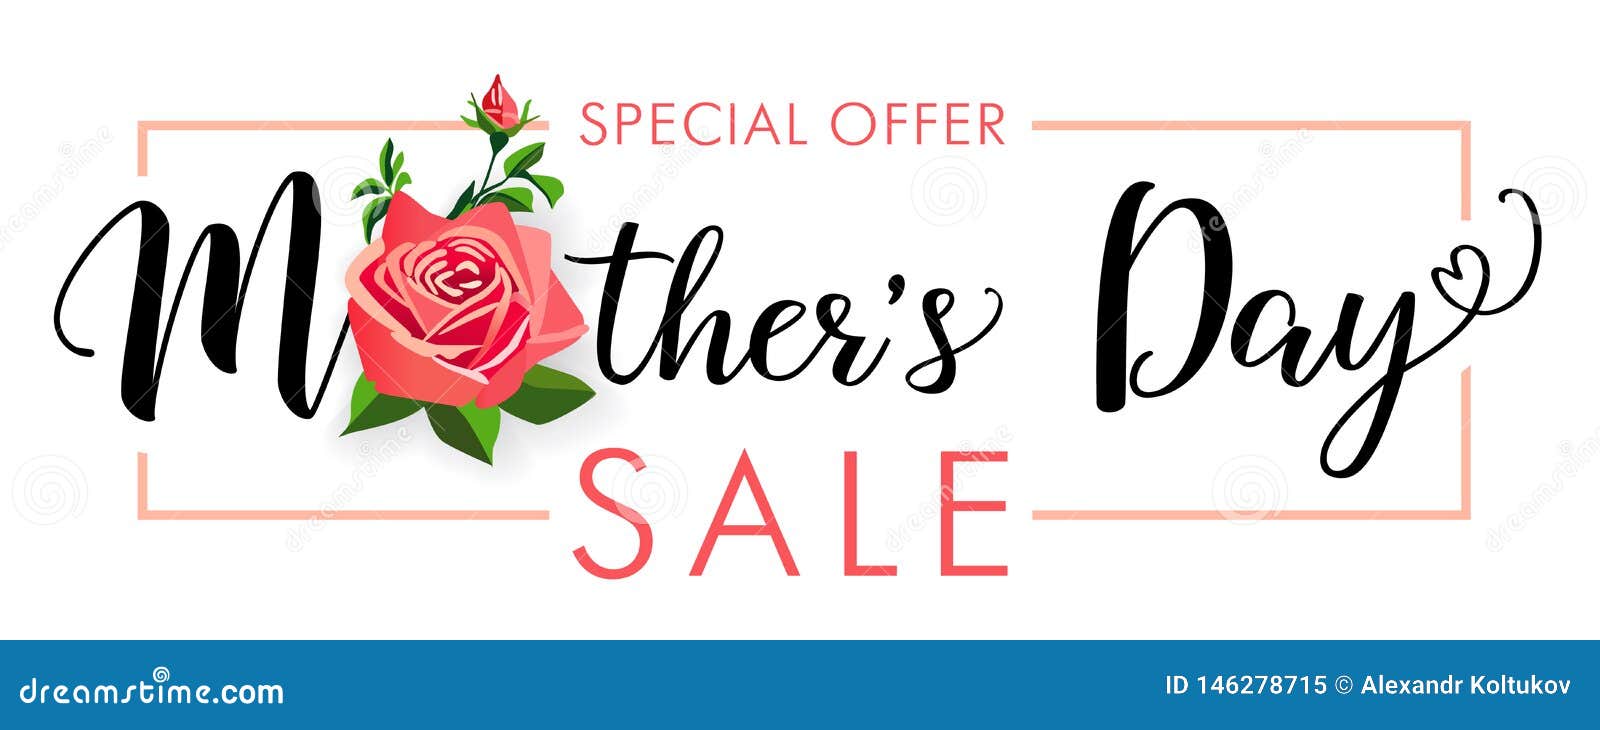 Download Special Offer Mothers Day Rose Sale Banner Stock Vector ...